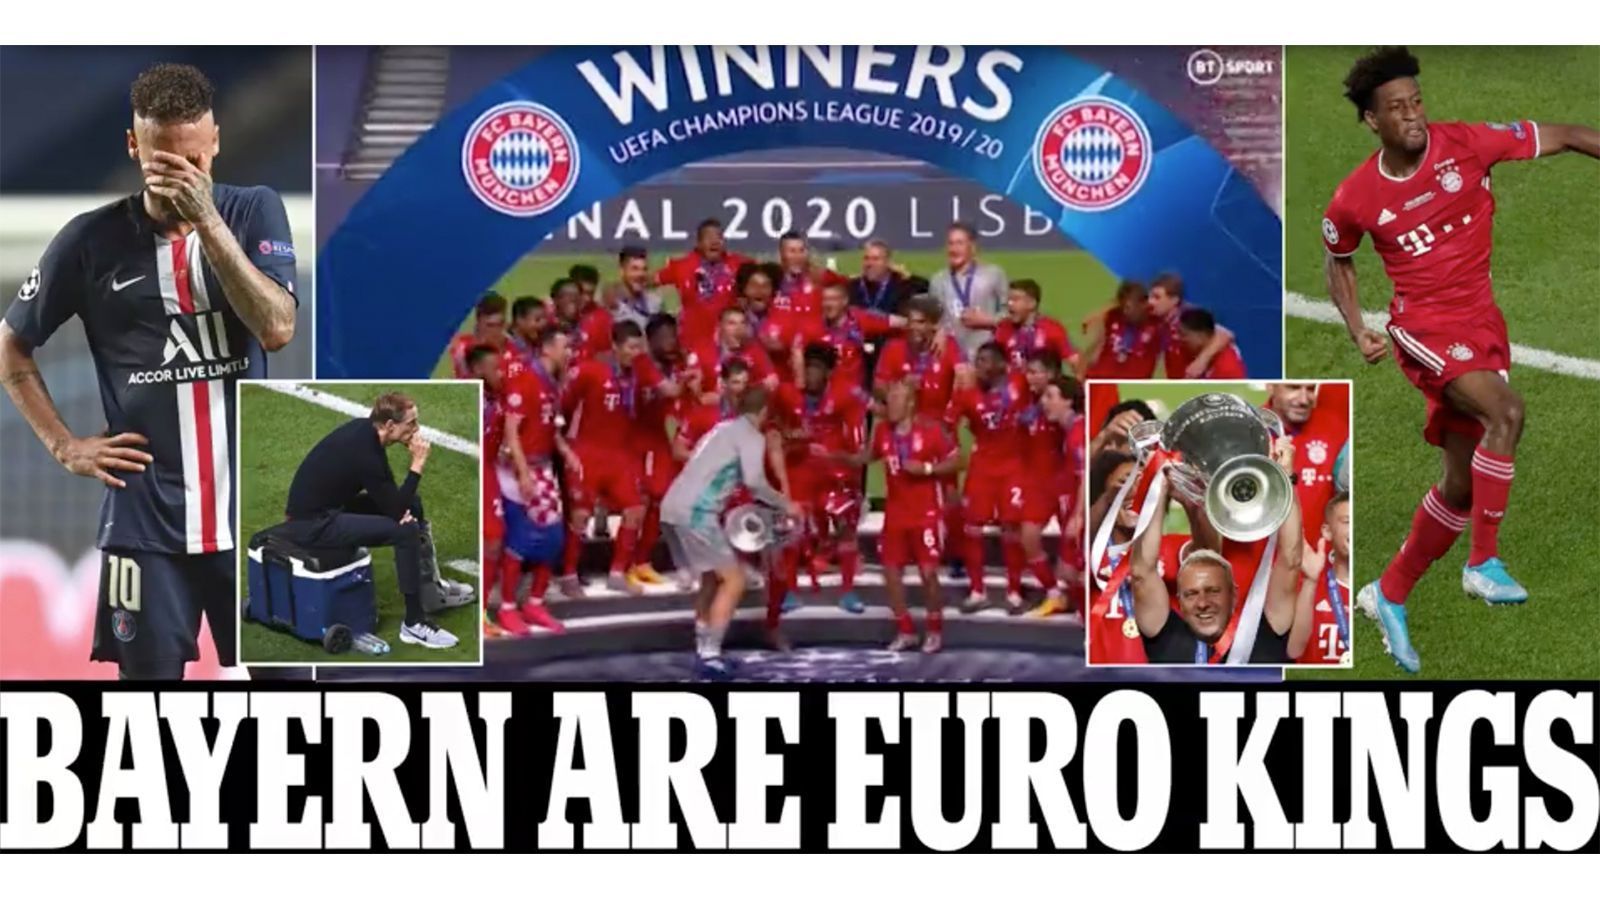 
                <strong>England</strong><br>
                Daily Mail: Bayern sind Europas Könige
              